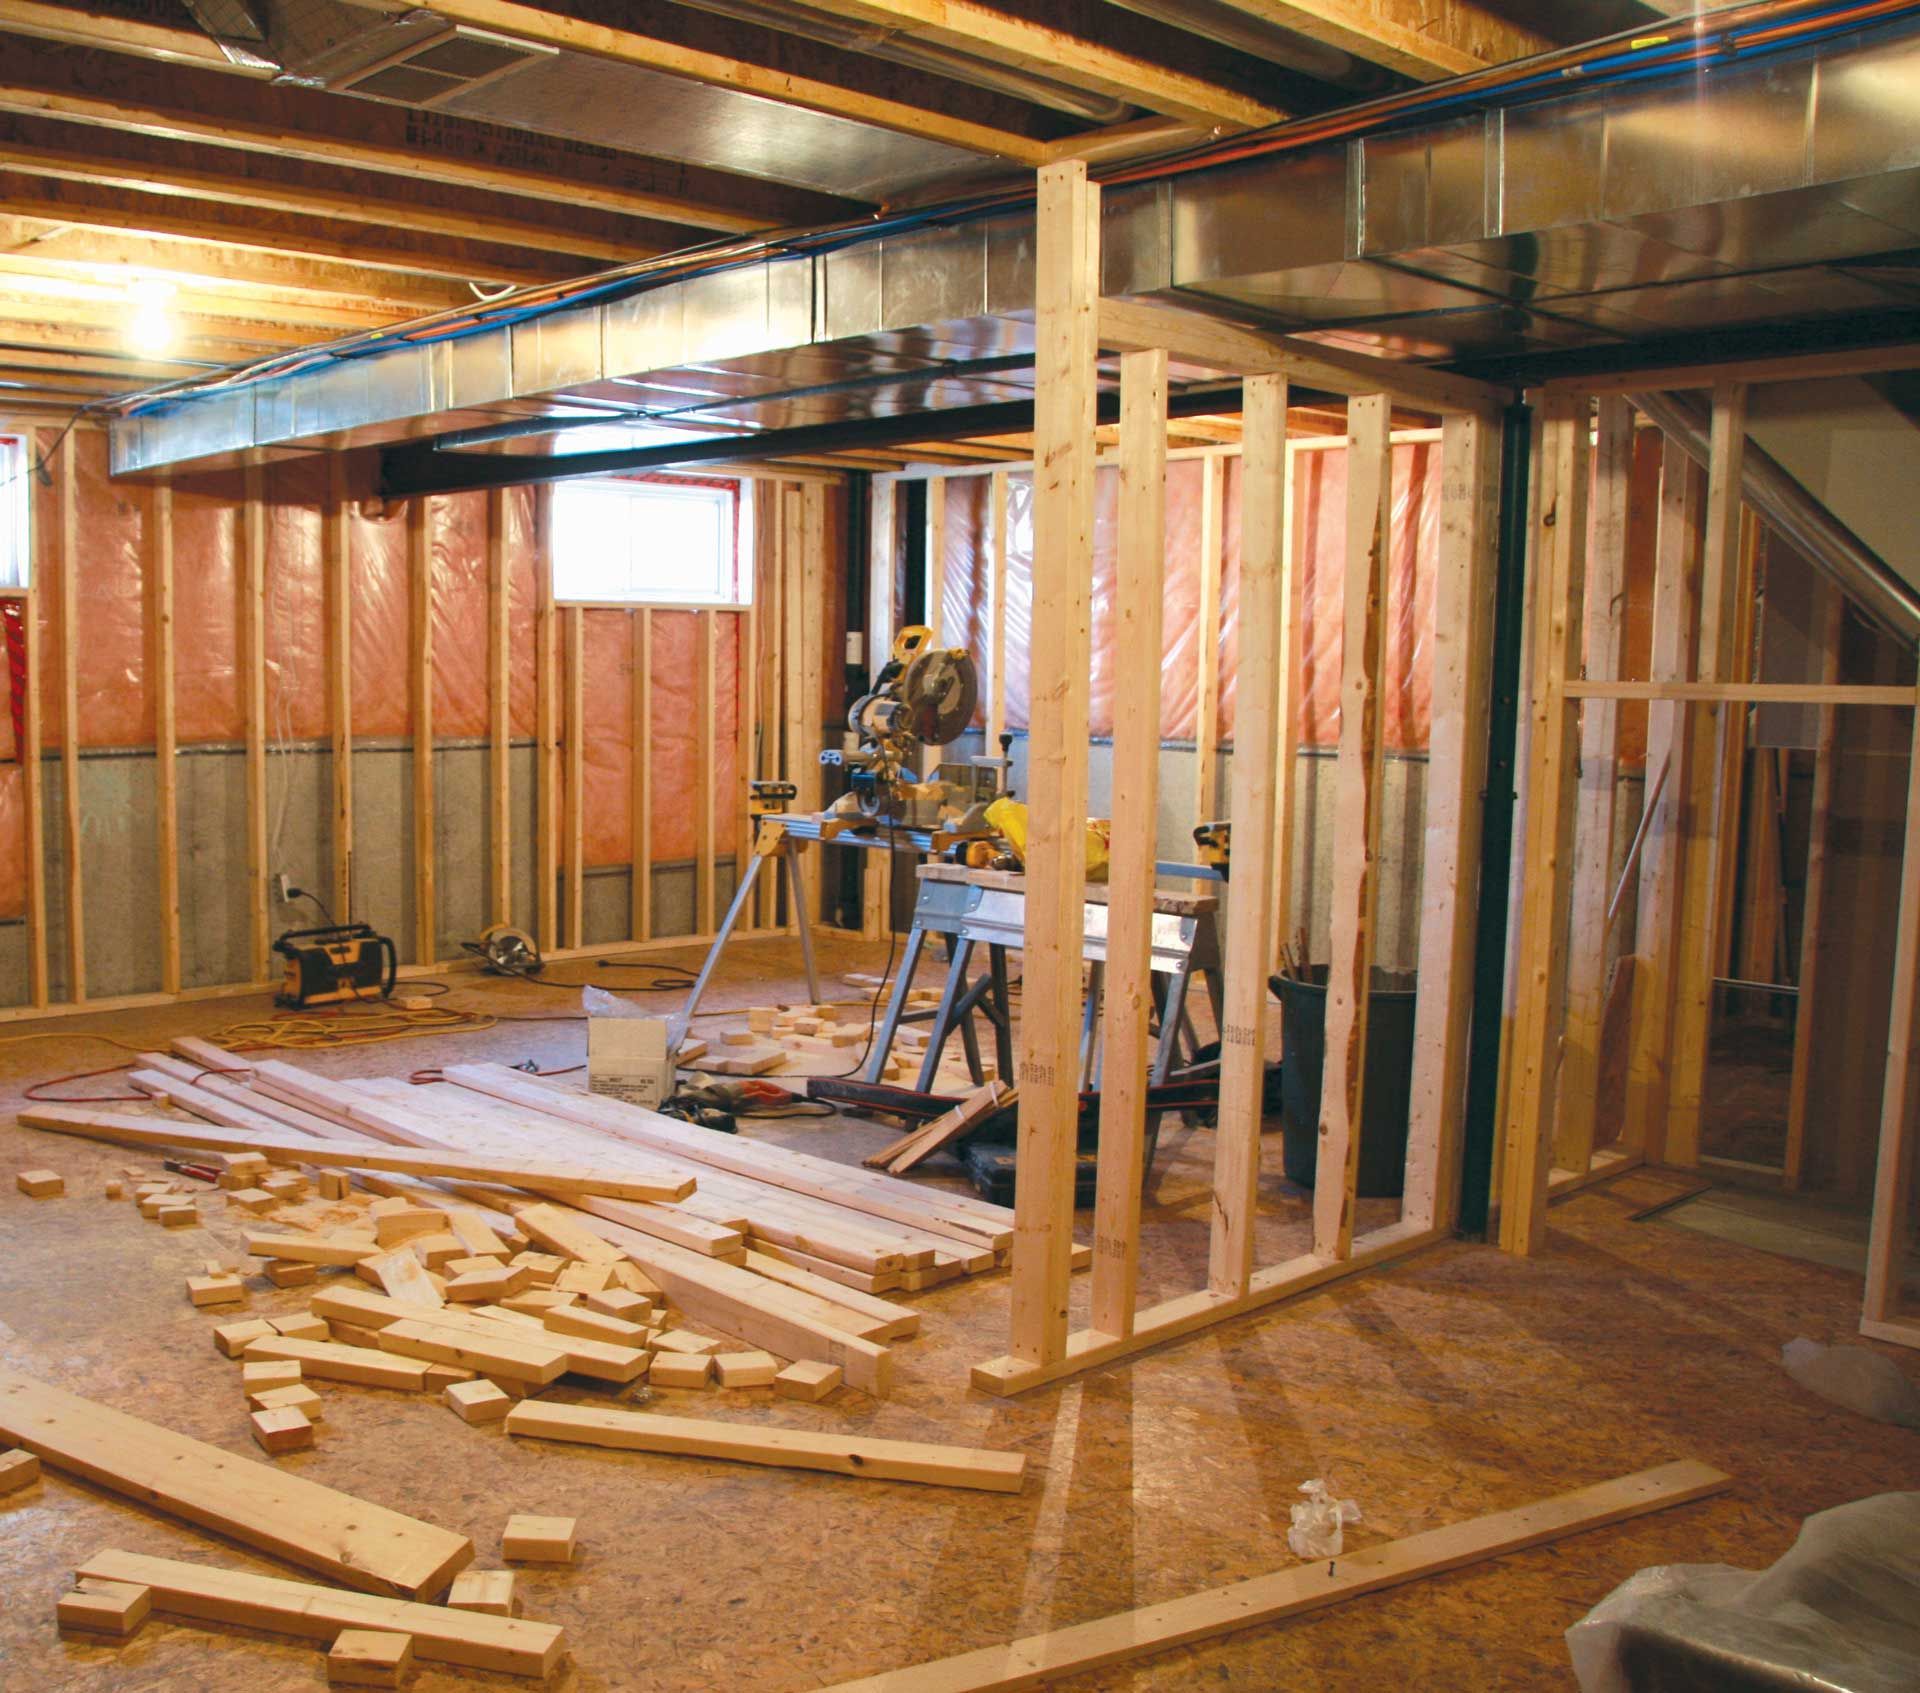 A room that is being built with a lot of wood on the floor